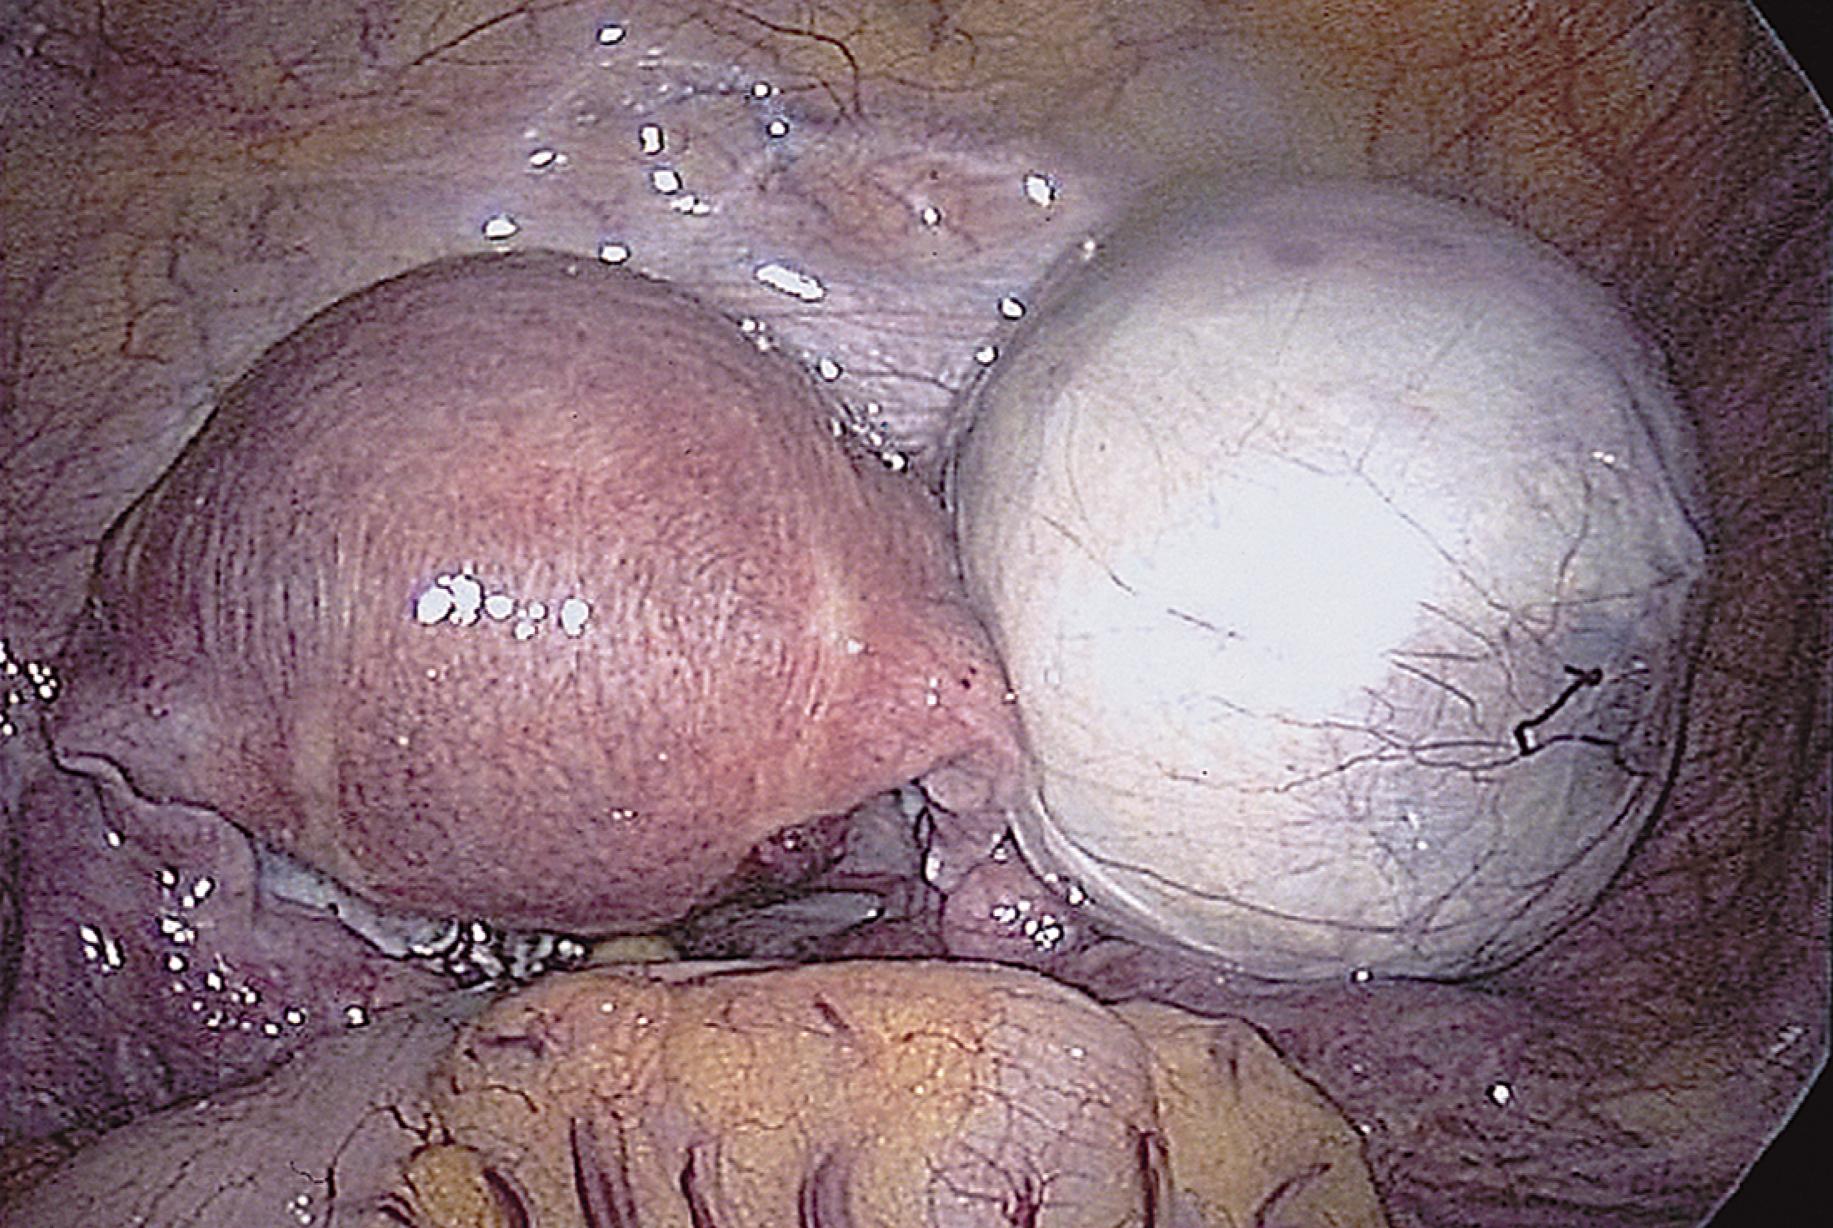 FIG. 115.4, The cyst is placed in the cul-de-sac so that the ovary can be inspected for bleeding.